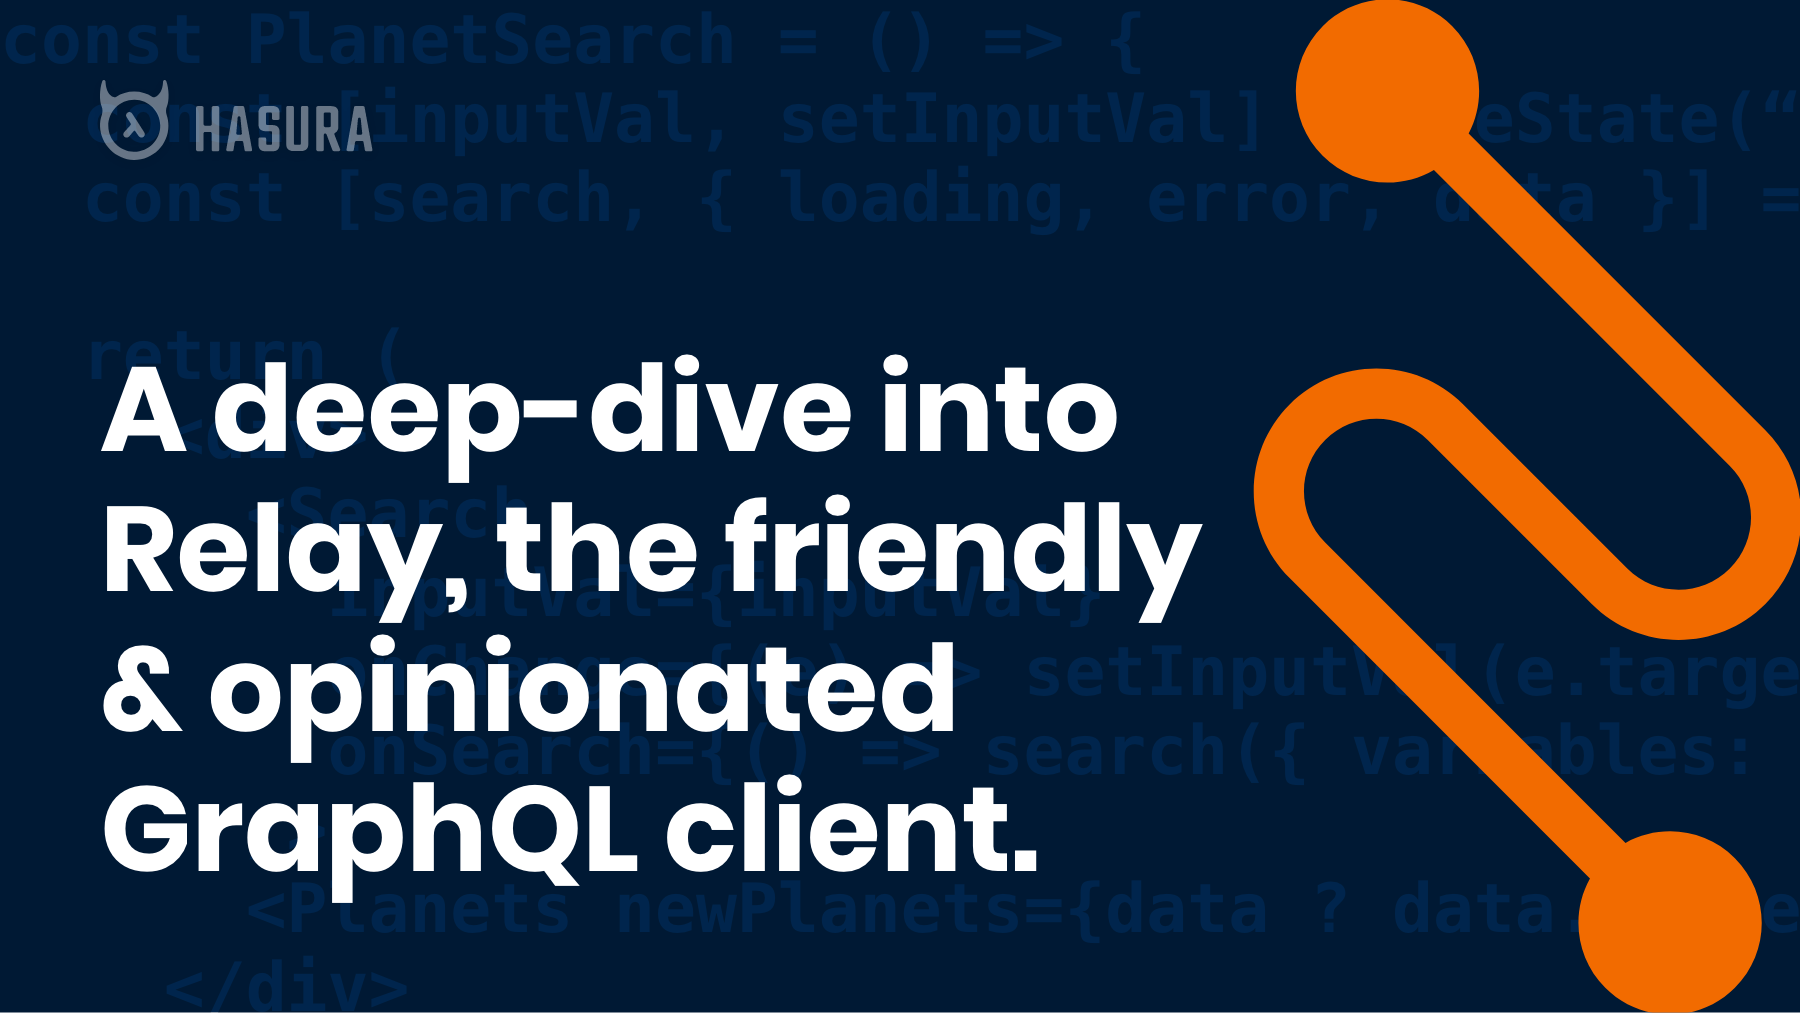 A deep-dive into Relay, the friendly & opinionated GraphQL client